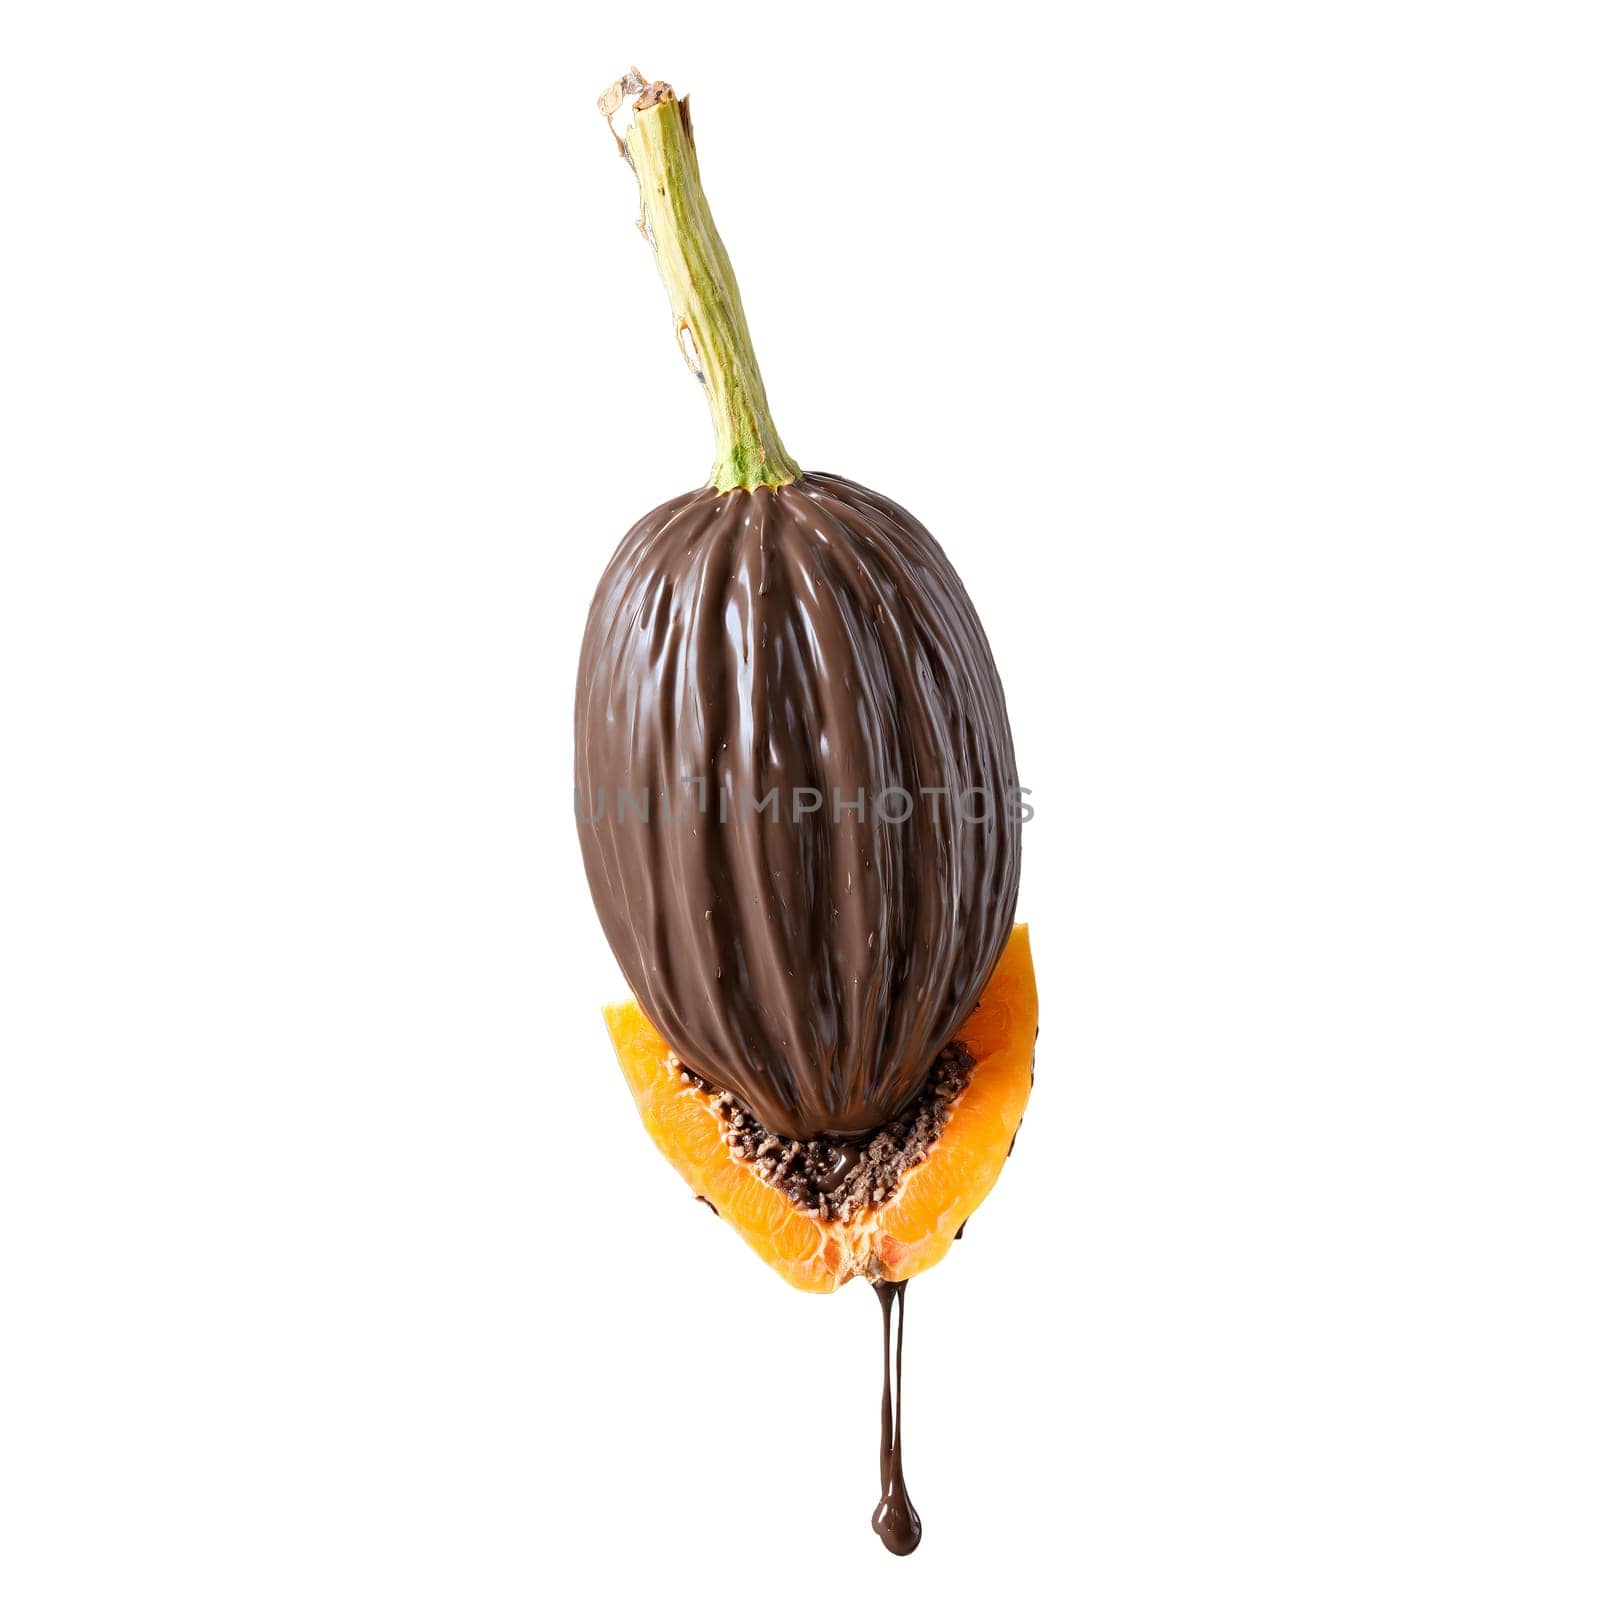 Chocolate covered dried papaya chewy and exotic tumbling and spinning with a burst of vibrant. Food isolated on transparent background.